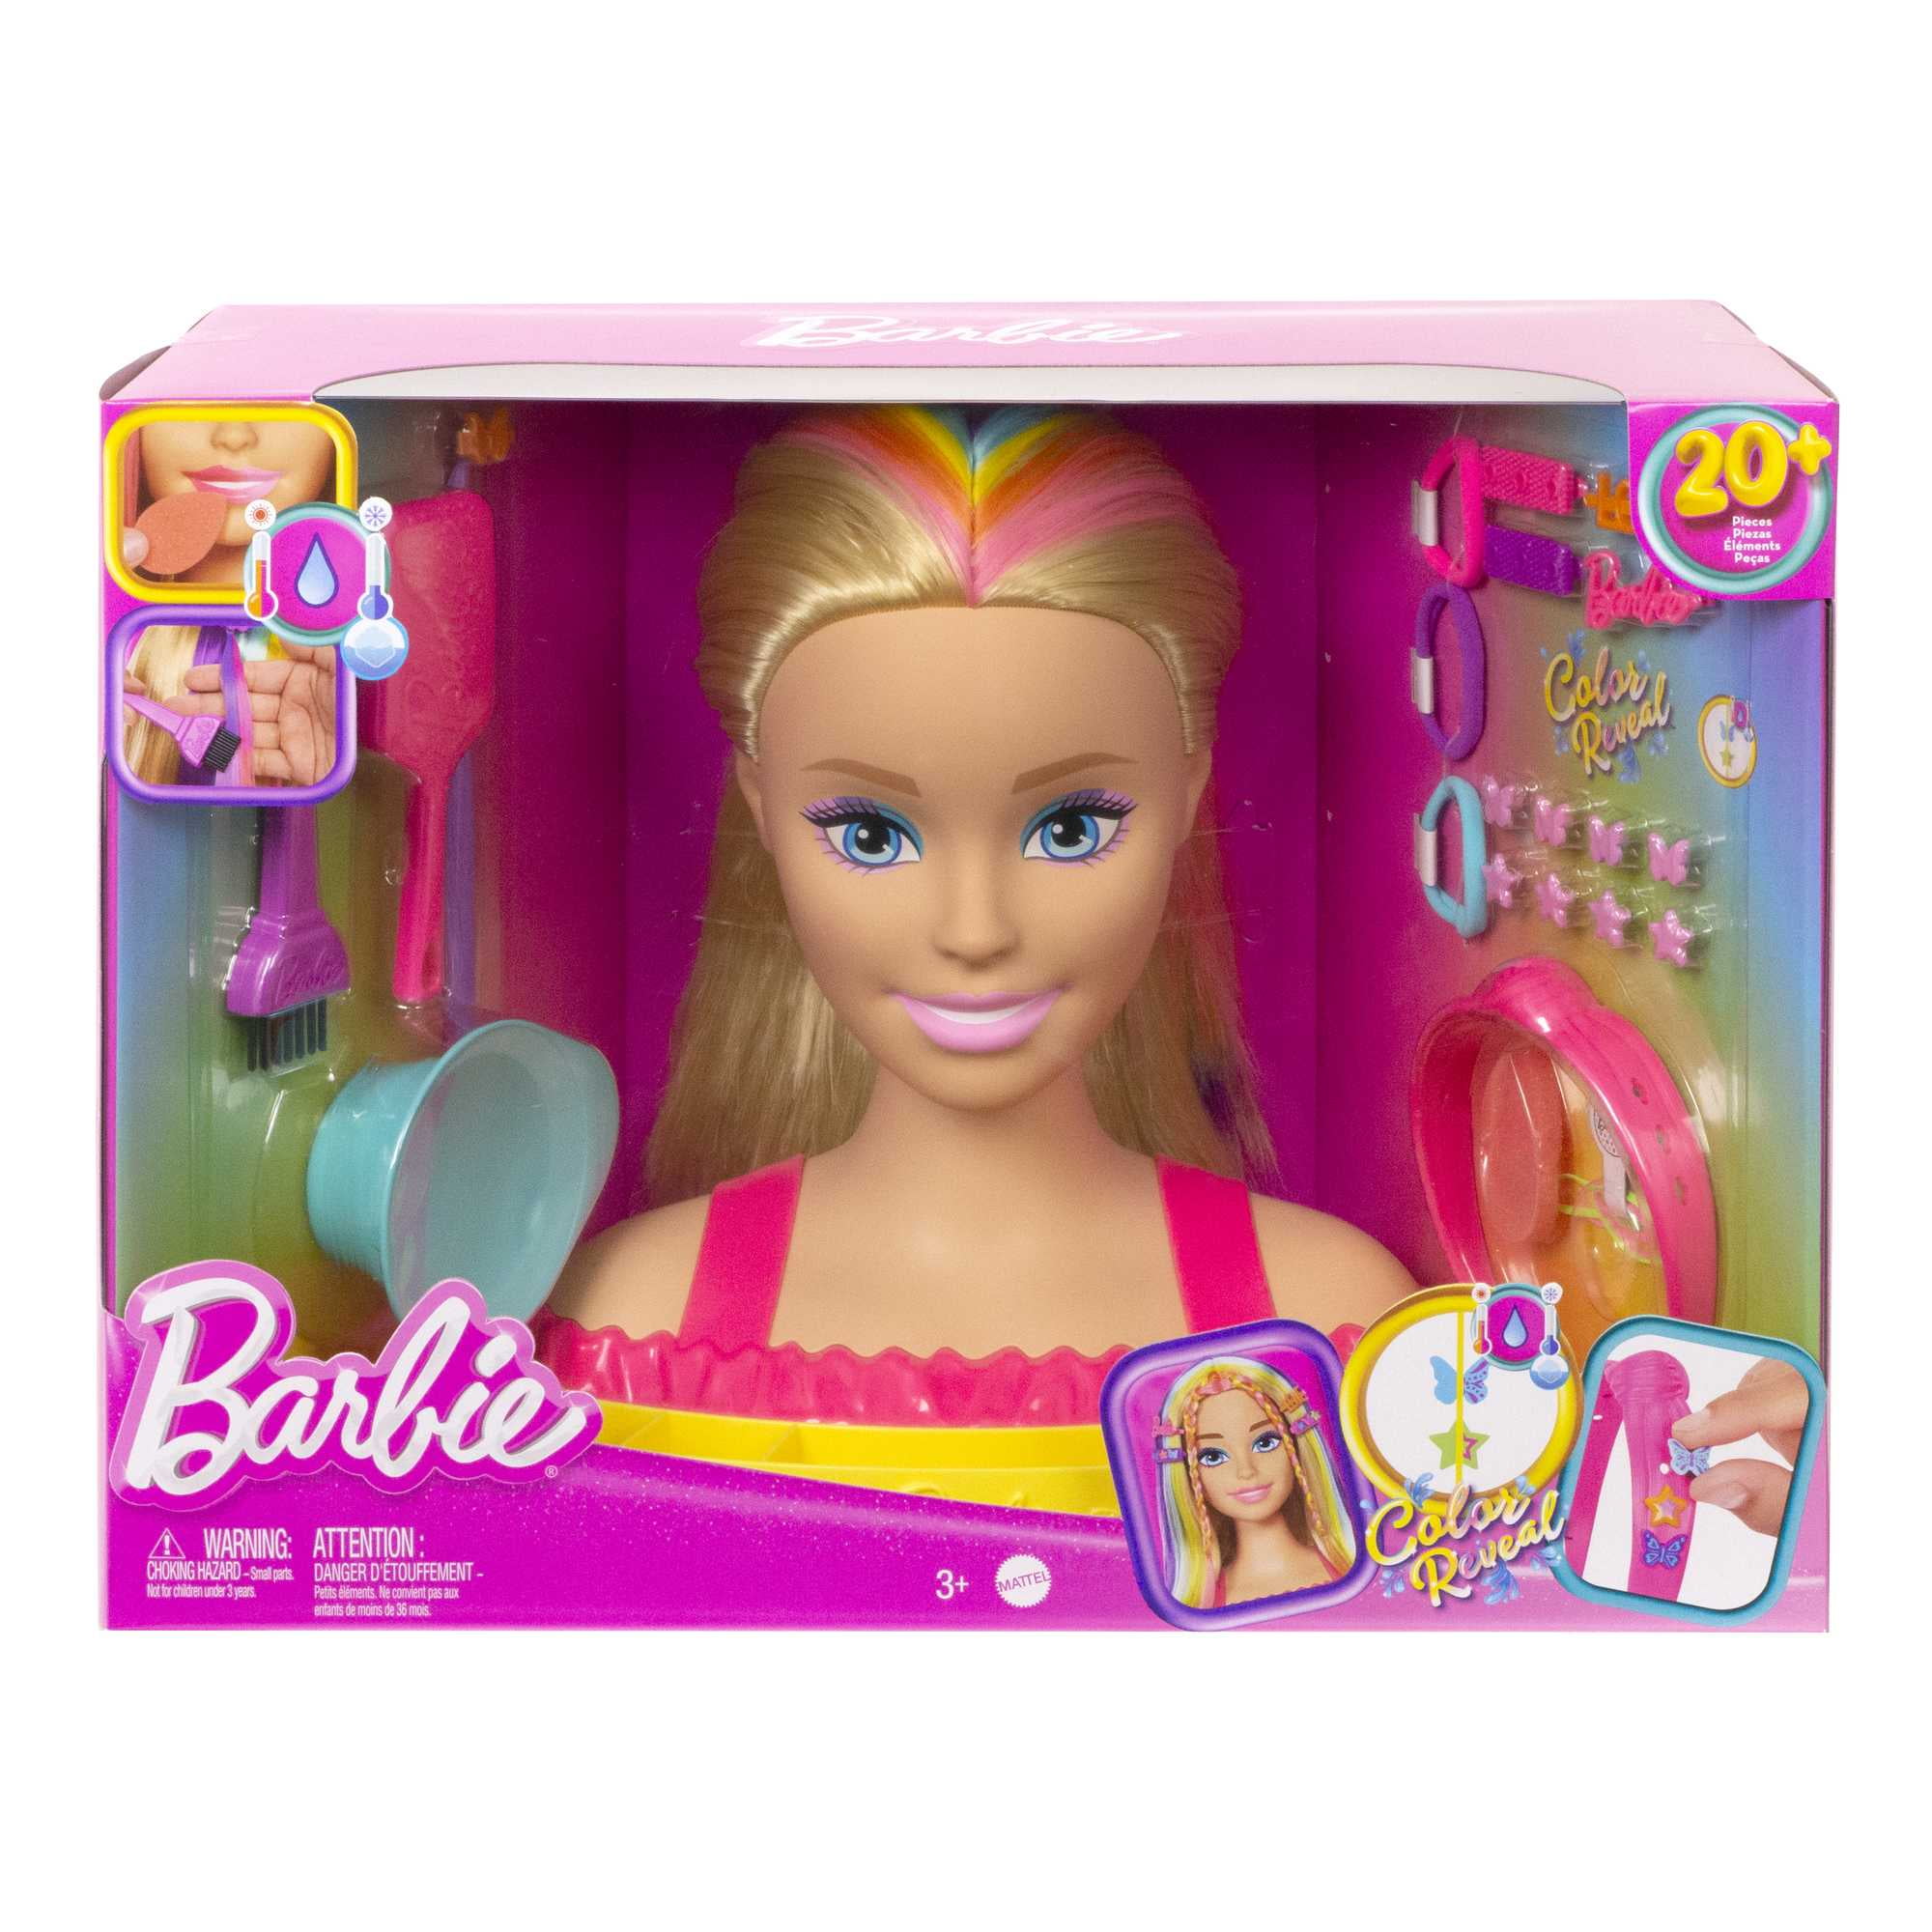 Barbie Rainbow Sparkle Deluxe Styling Head, Black Hair, Kids Toys for Ages 3 Up, Gifts and Presents, Size: 15.5 inches; 6.88 inches; 12.75 Inches